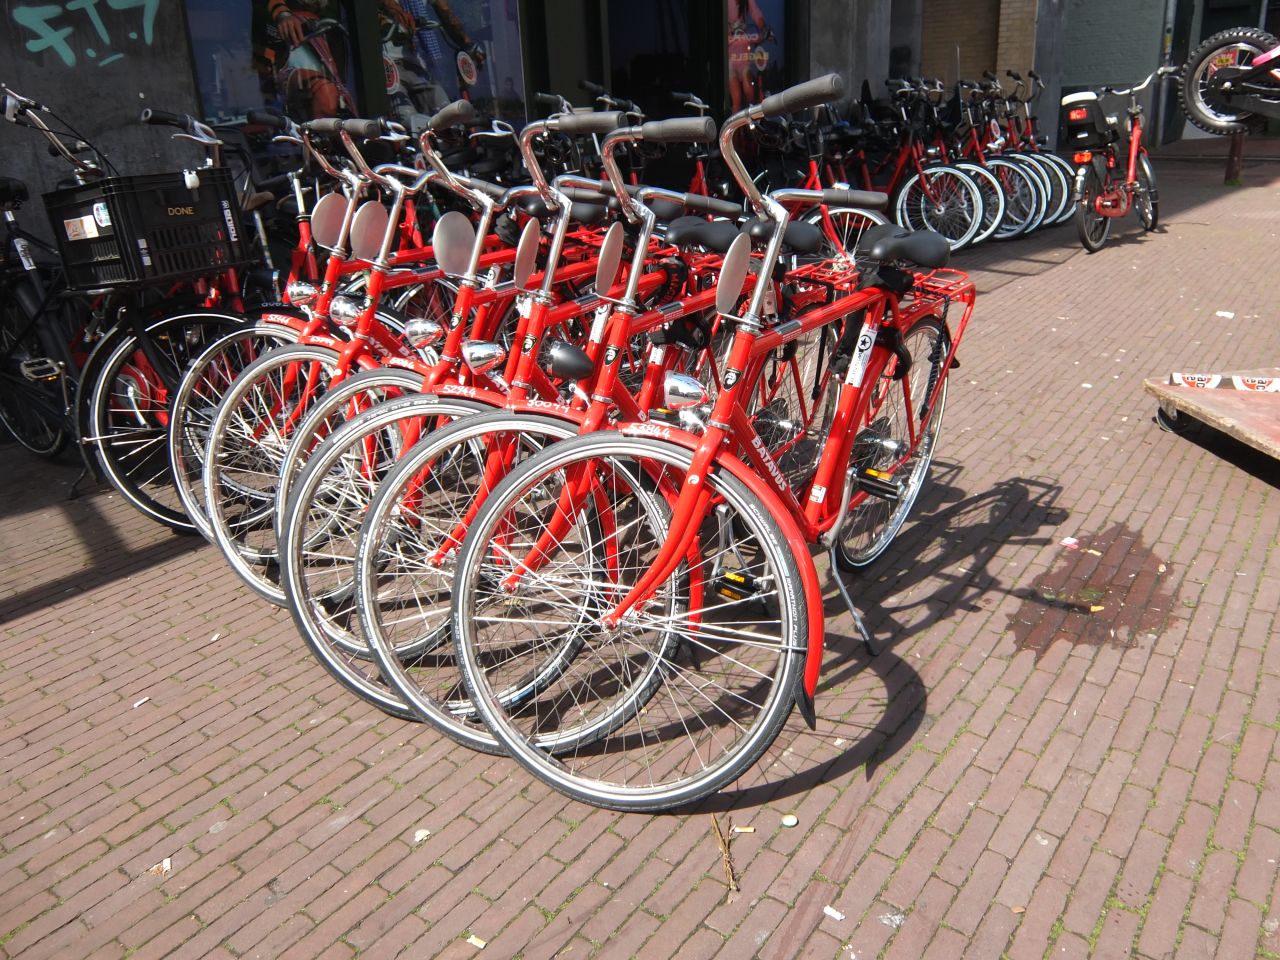 Bikes are a great way of getting around Amsterdam. The city has about 4,000 kilometers (2,480 miles) of cycle paths and so many bikes it's like the Tour de France for normal riders. <br /><br />If you're planning a trip there, check out the <a href="http://www.cnn.com/2015/10/29/travel/insider-guide-amsterdam/index.html">Amsterdam: Insider Travel Guide</a>.